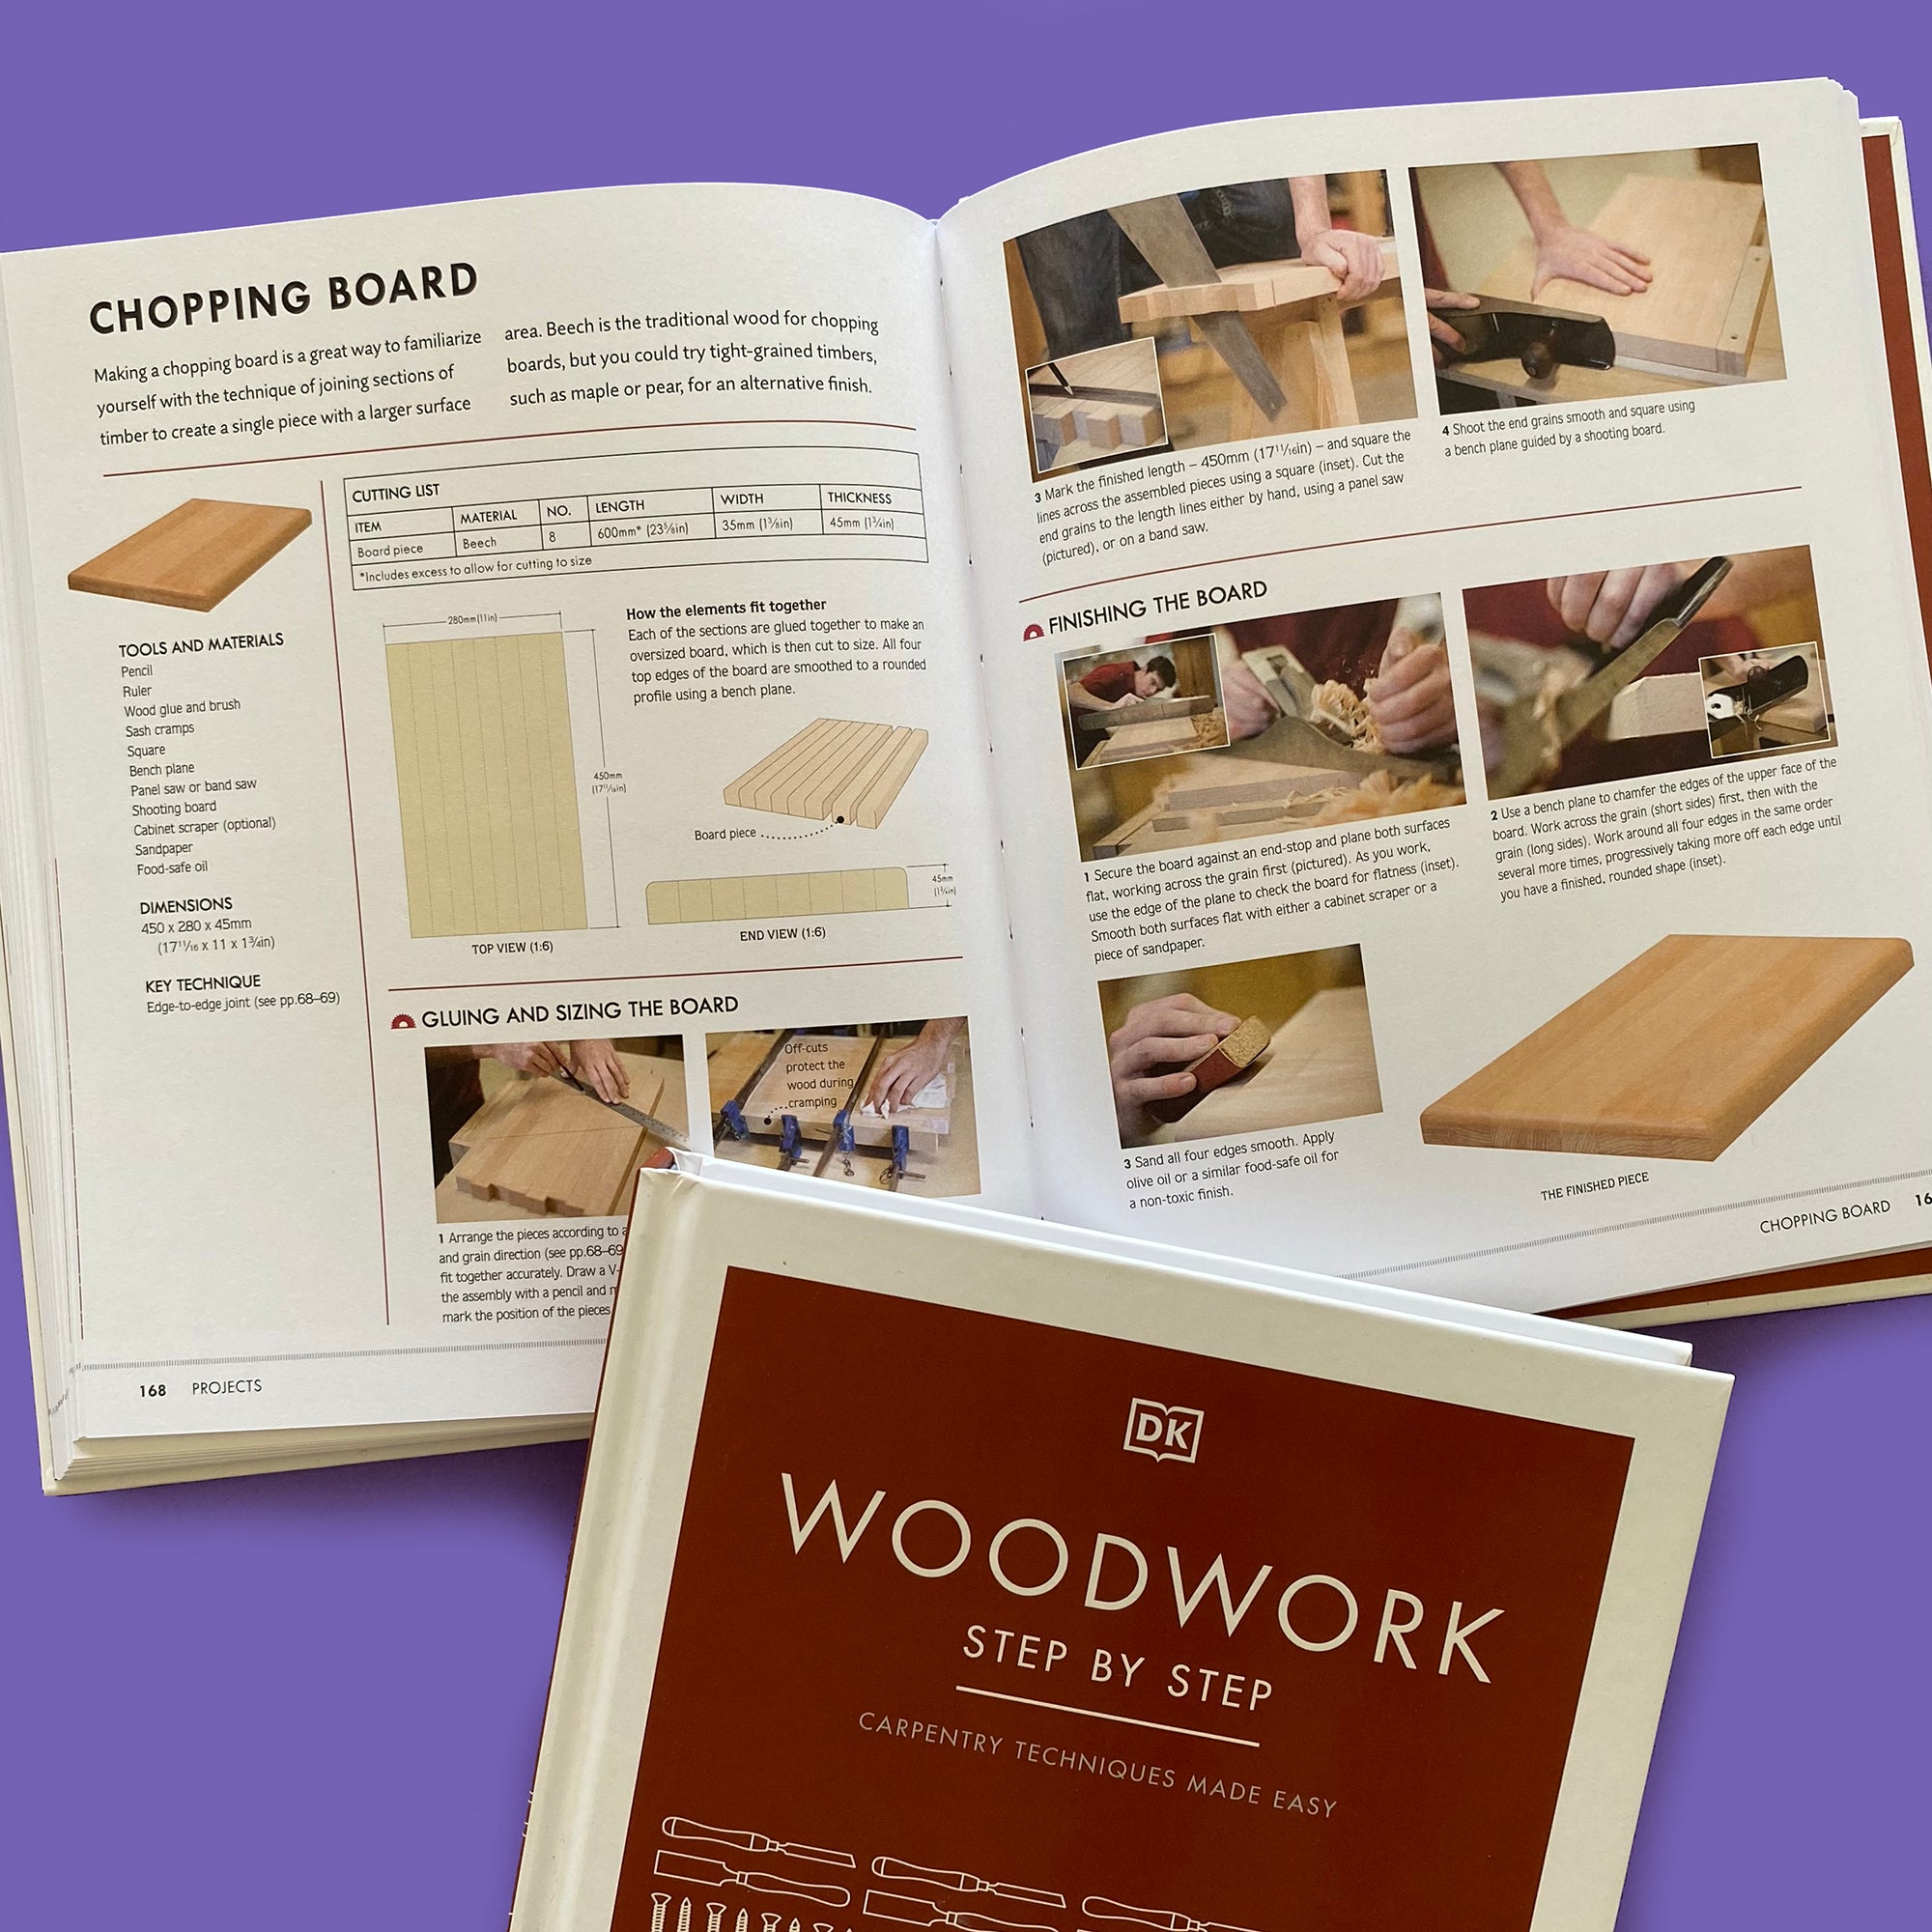 Woodwork Step-by-Step - 5% OFF